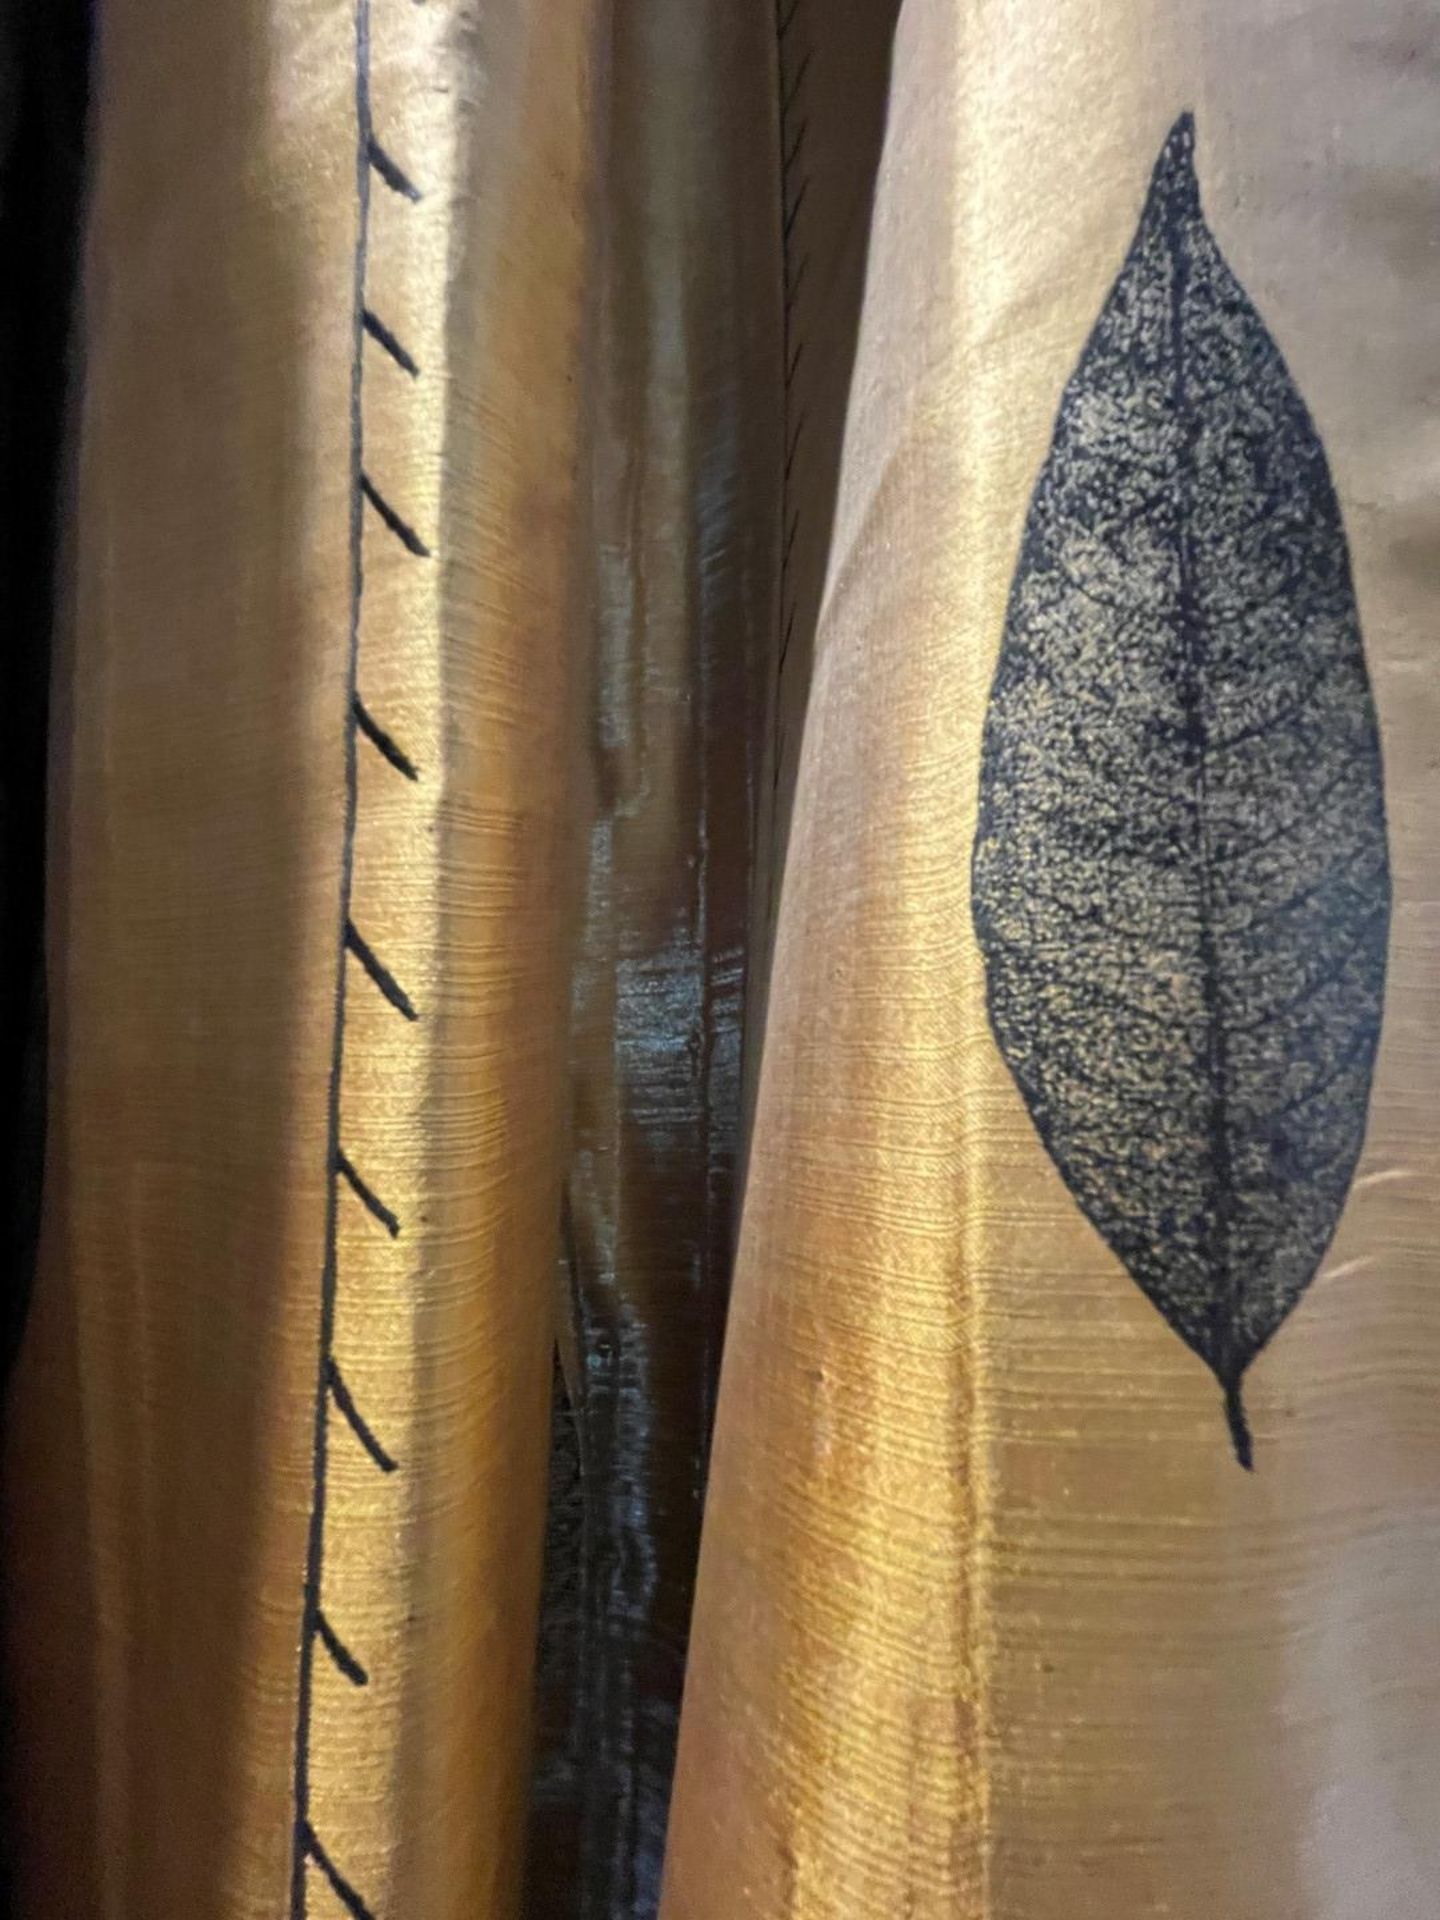 3 x Sets Of Bespoke Premium Quality Lined Curtains In Gold With A Leaf Design - 285cm Drop - Image 12 of 20